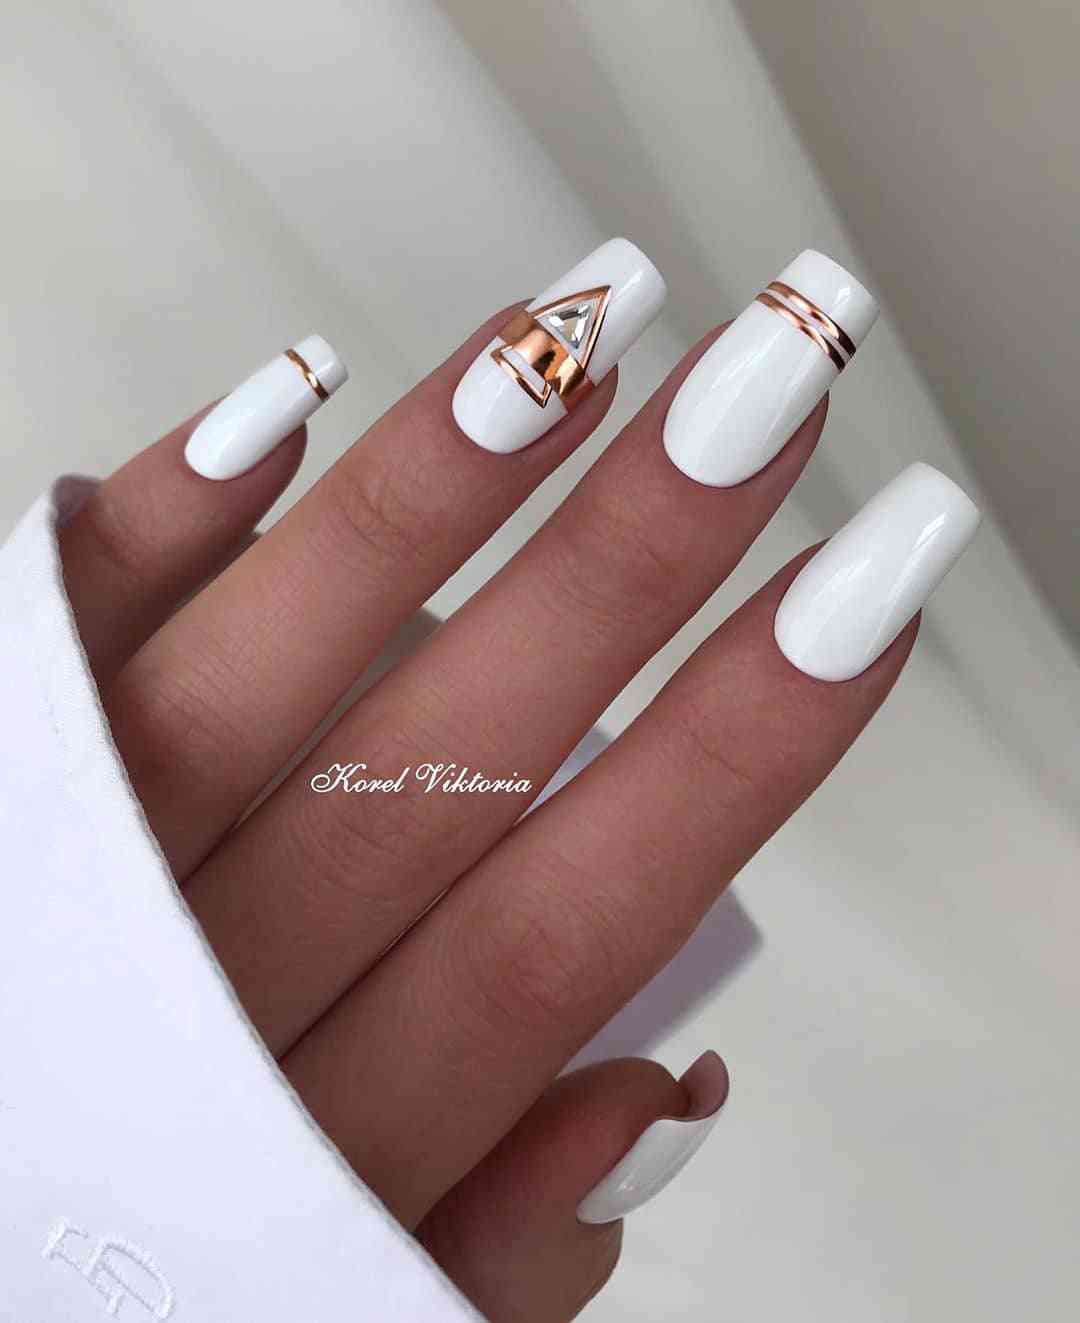 50 Best Nail Designs Trends To Try Out In 2022 images 9